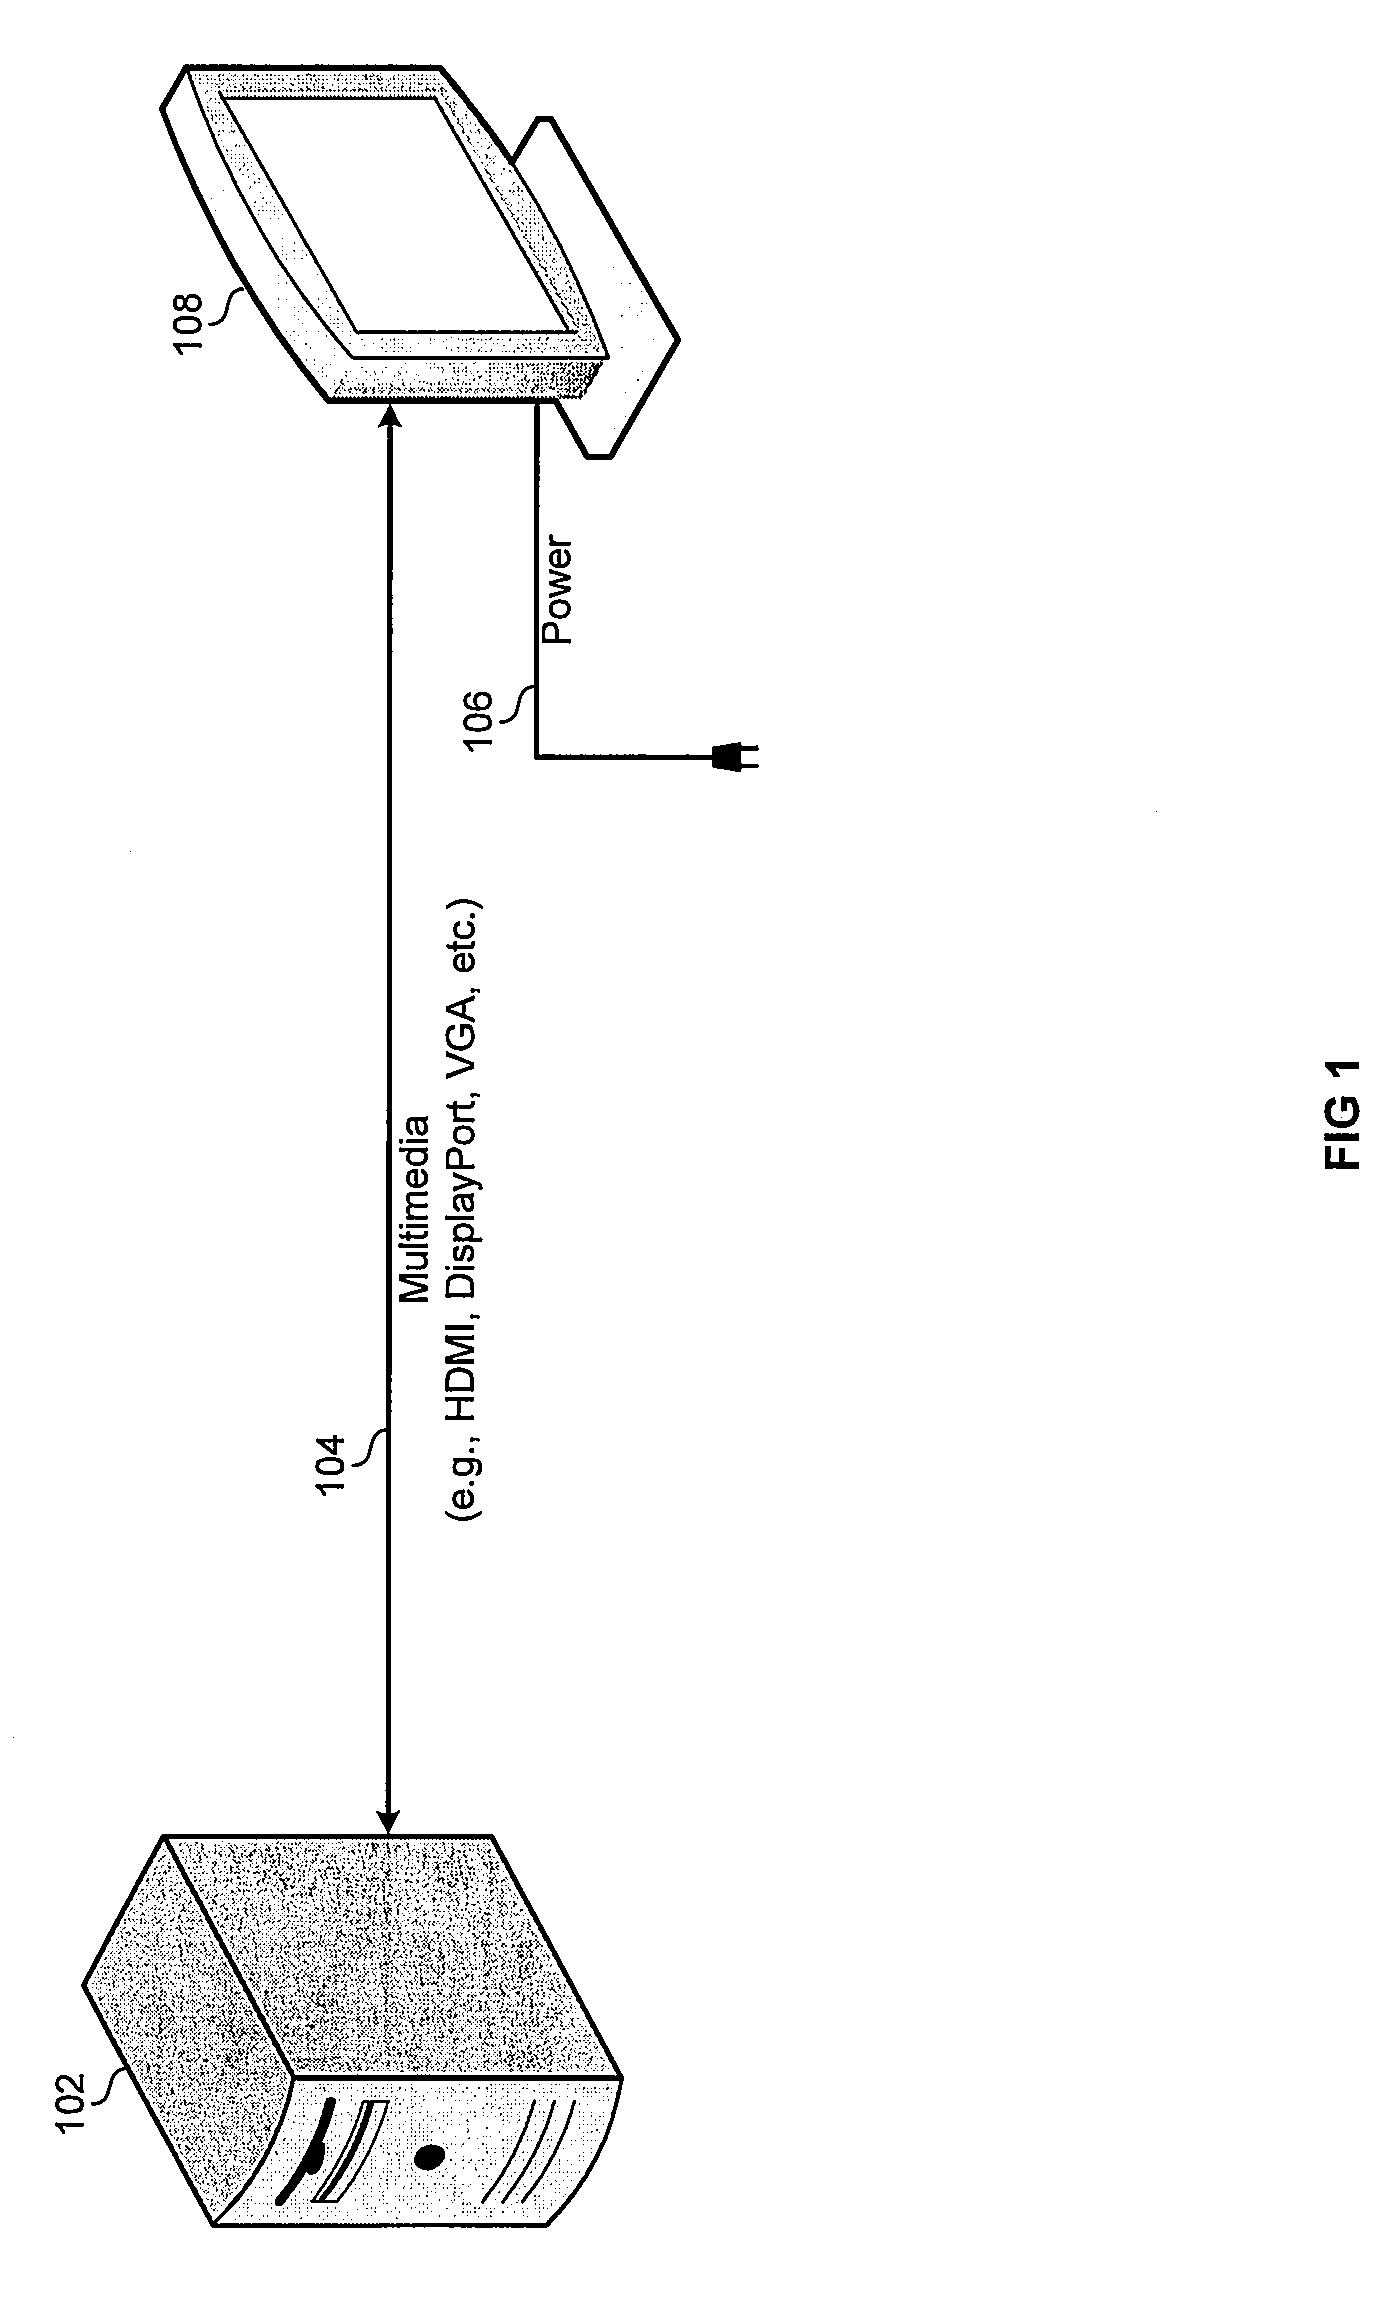 Method And System For Utilizing A Single Connection For Efficient Delivery Of Power And Multimedia Information